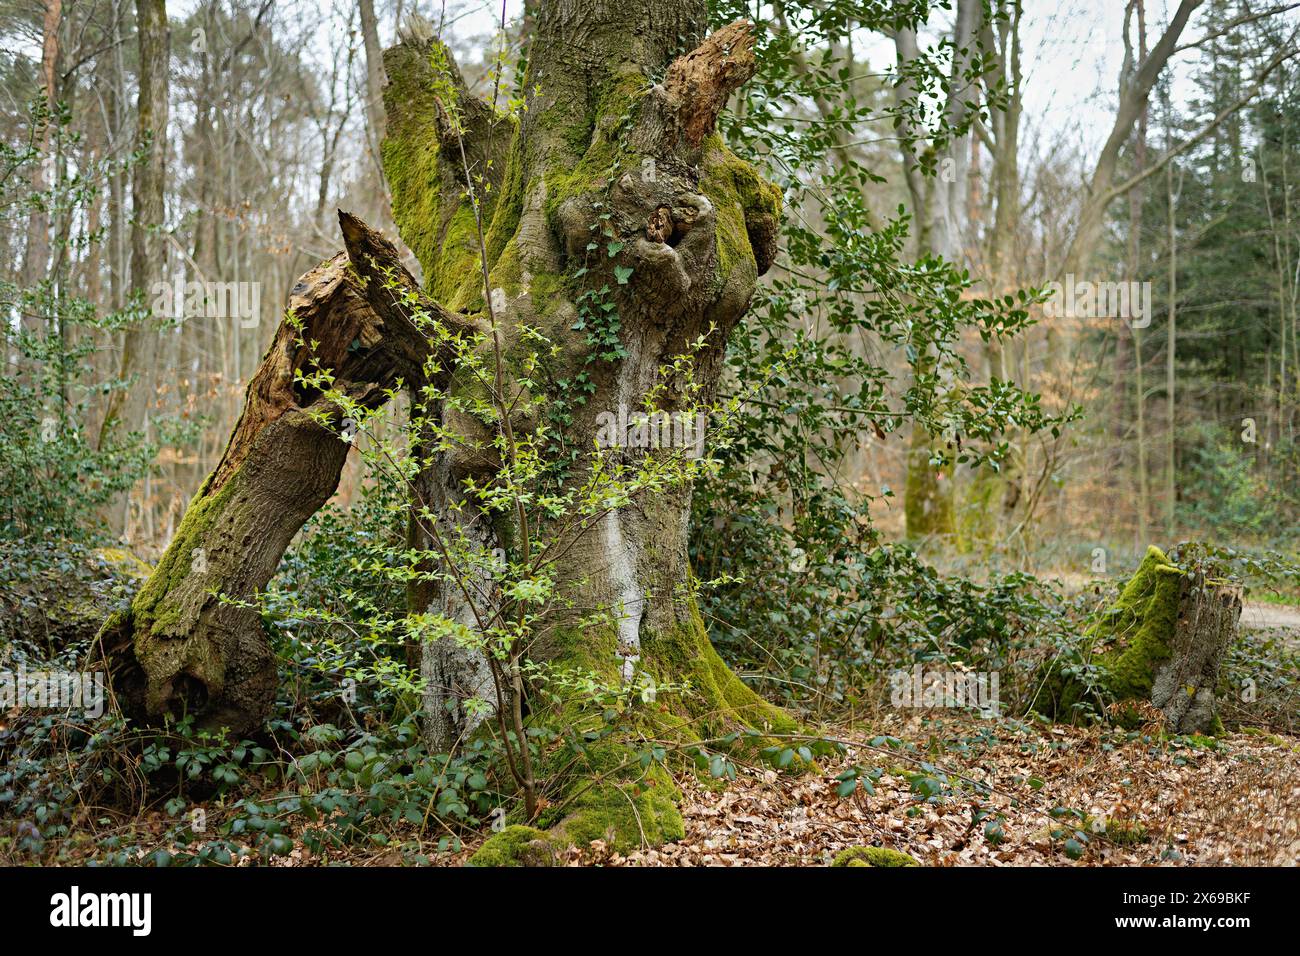 Europe, Germany, North Rhine-Westphalia, Bonn, city, Bonn, Ippendorf, Kottenforst, Waldau, forest, nature reserve, beech, beech tree, tree stump, old tree, dead wood, tree creature, moss-covered trunk, broken branch, atmosphere, mystical, foreground young beech, contrast, old and young, background forest, spring, beginning green, daylight, Stock Photo